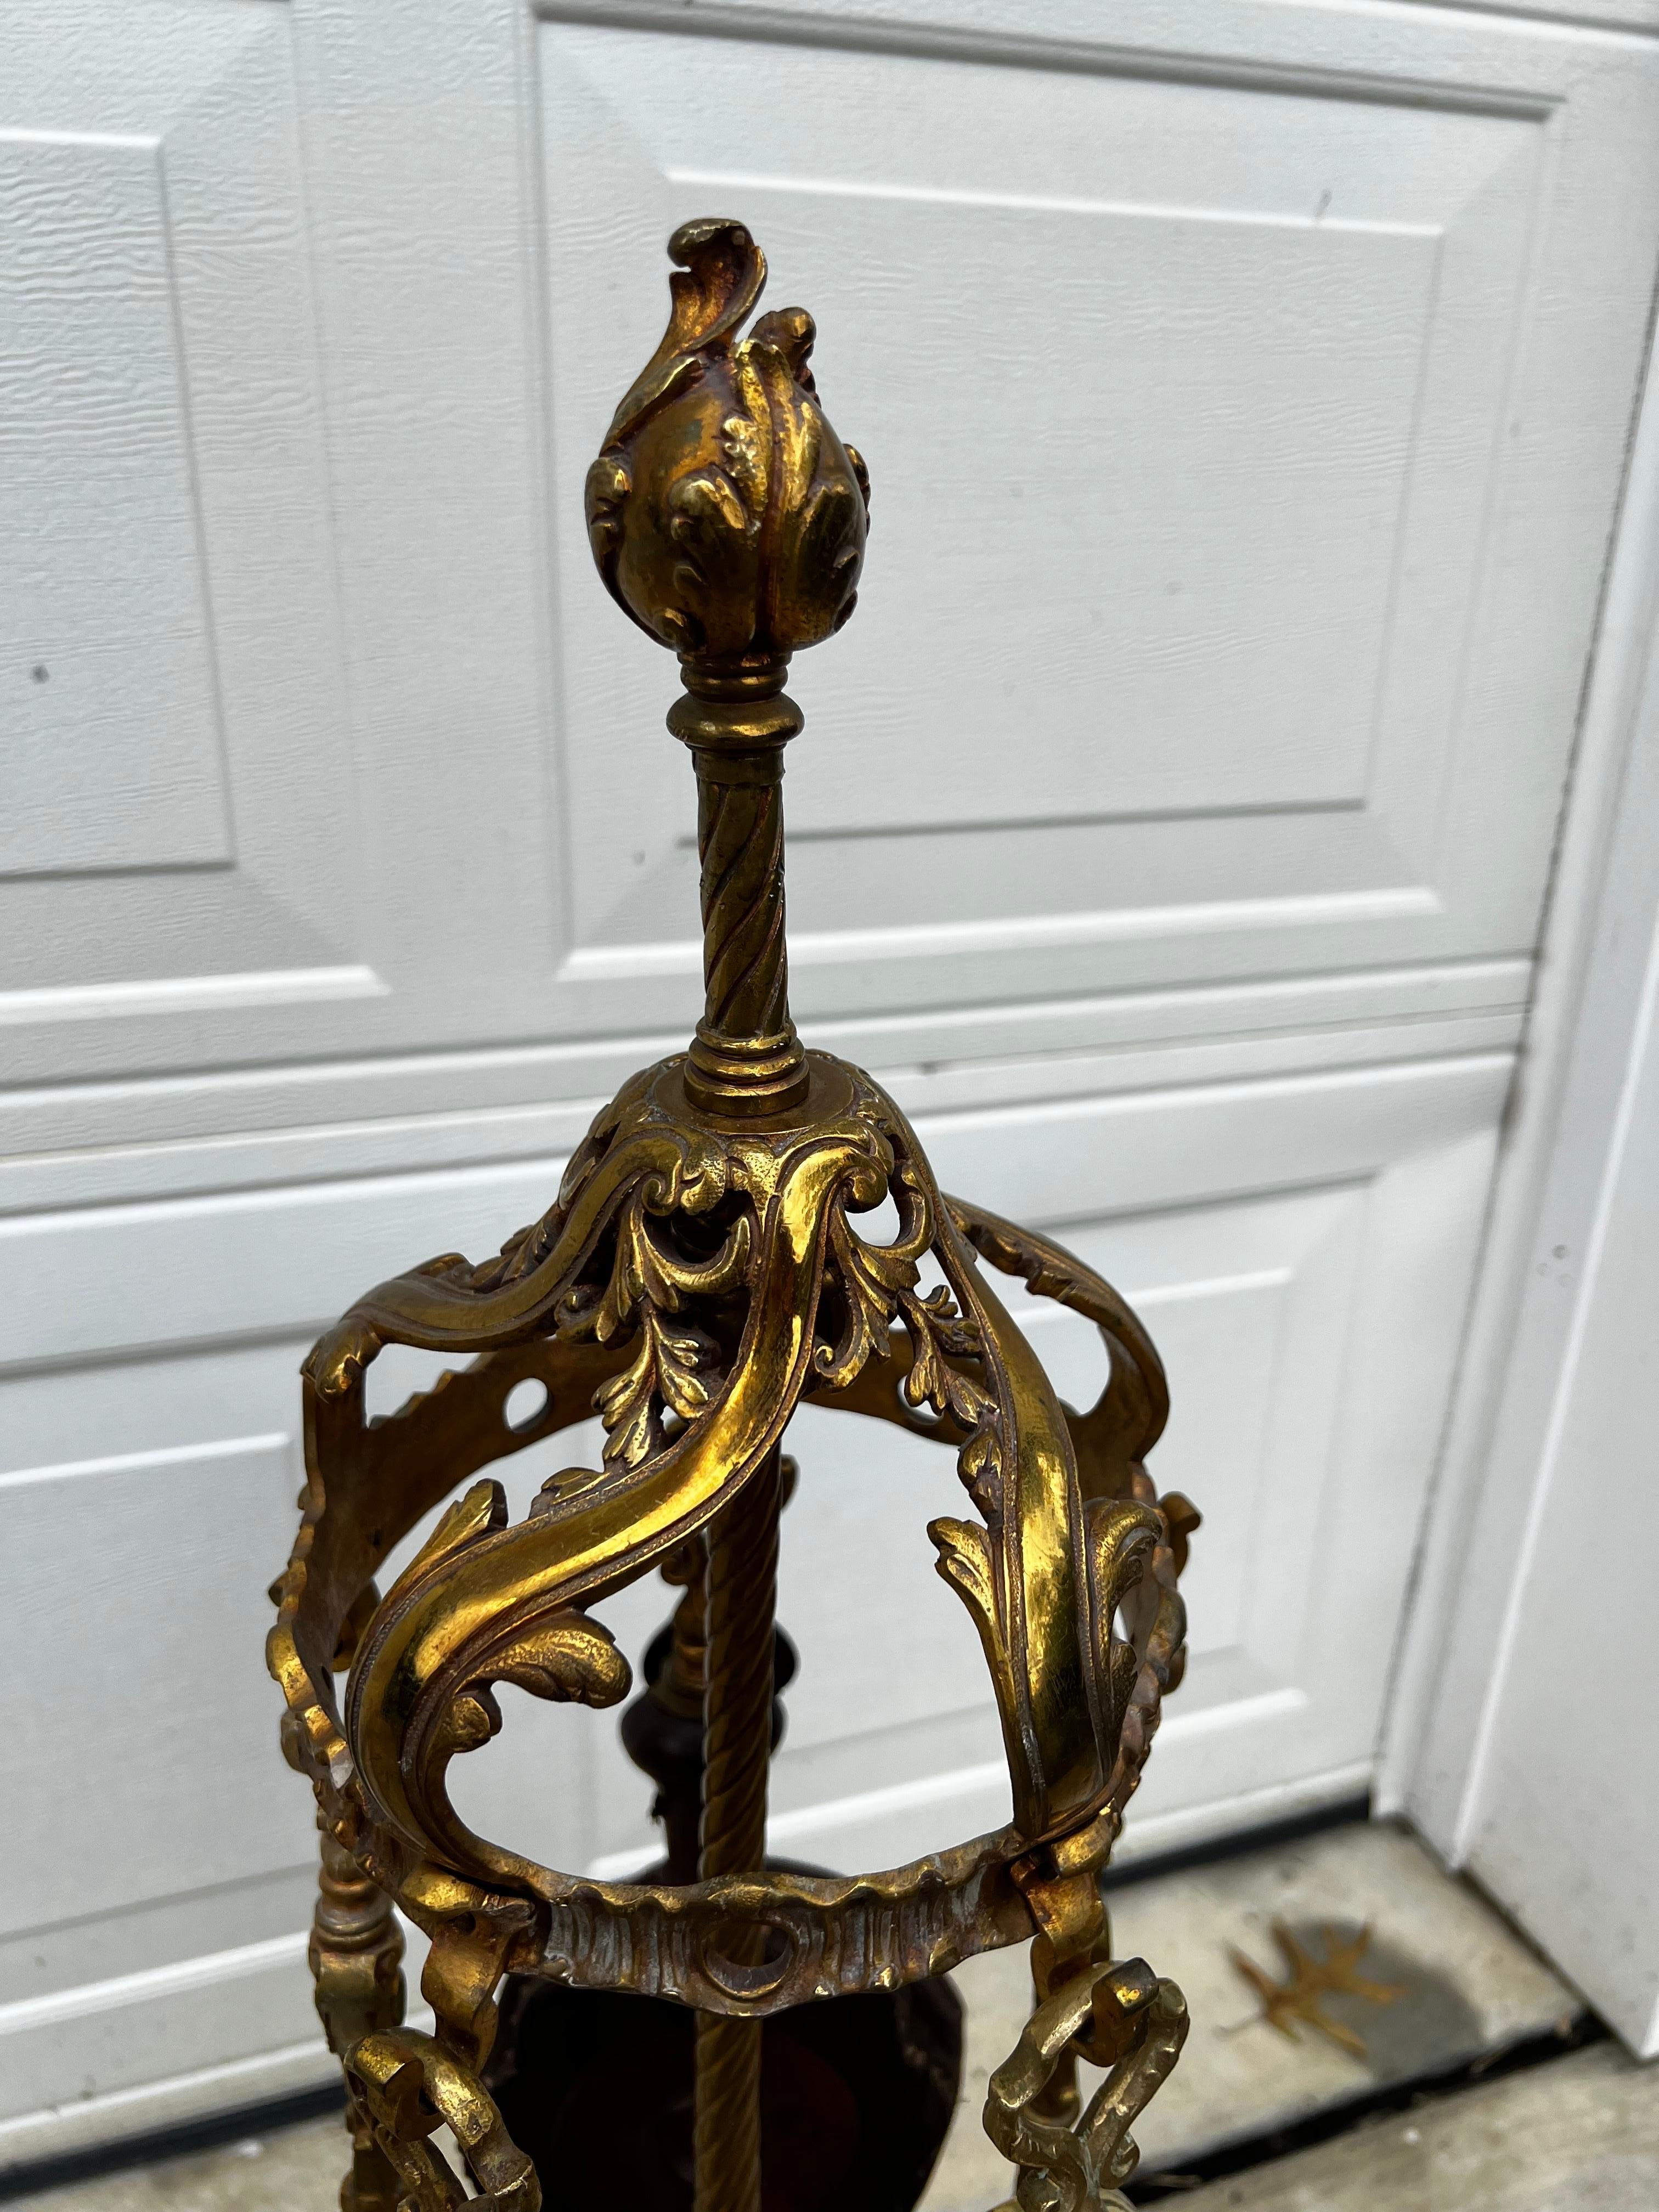 A magnificent  set of fireplace tools with stand. This extraordinarily crafted  stand with acanthus leaves design and 5 hook arms will stand out in your fireplace decor. 
All tools have intricate handle design and show the level of craftsmanship of